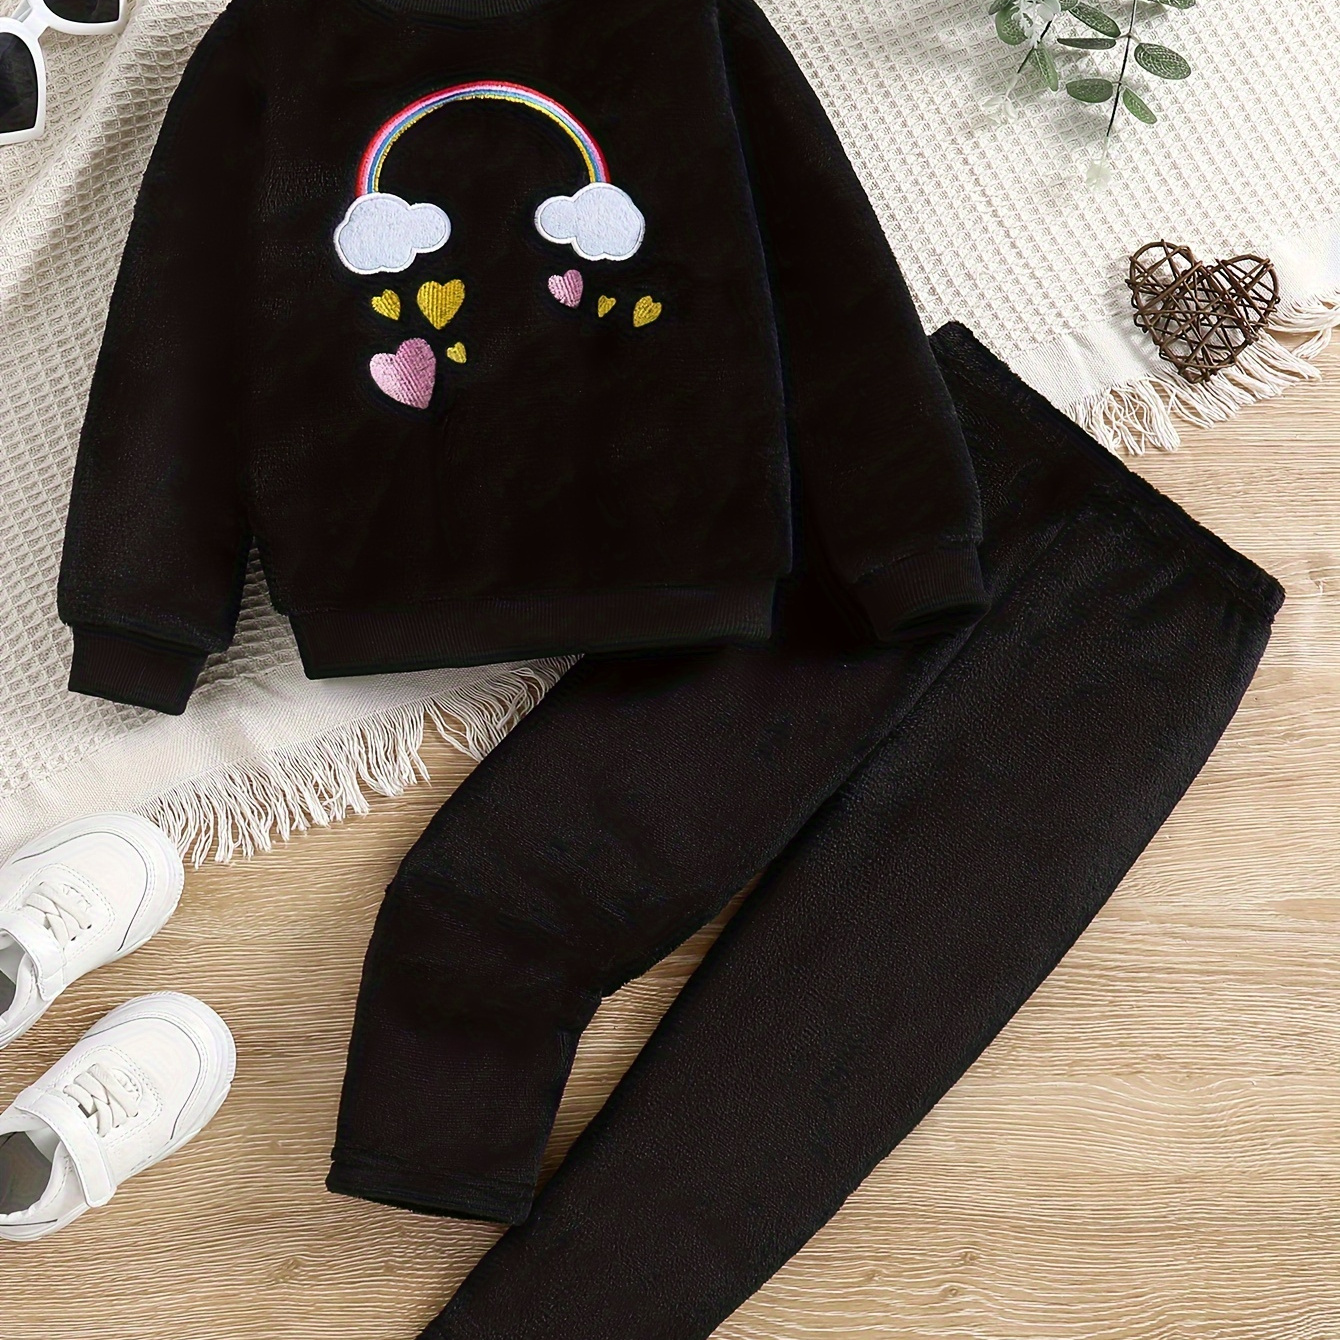 

2pcs Girl's Rainbow Embroidered Outfit, Fuzzy Fleece Sweatshirt & Sweatpants Set, Thermal Long Sleeve Top, Kid's Clothes For Spring Fall Winter